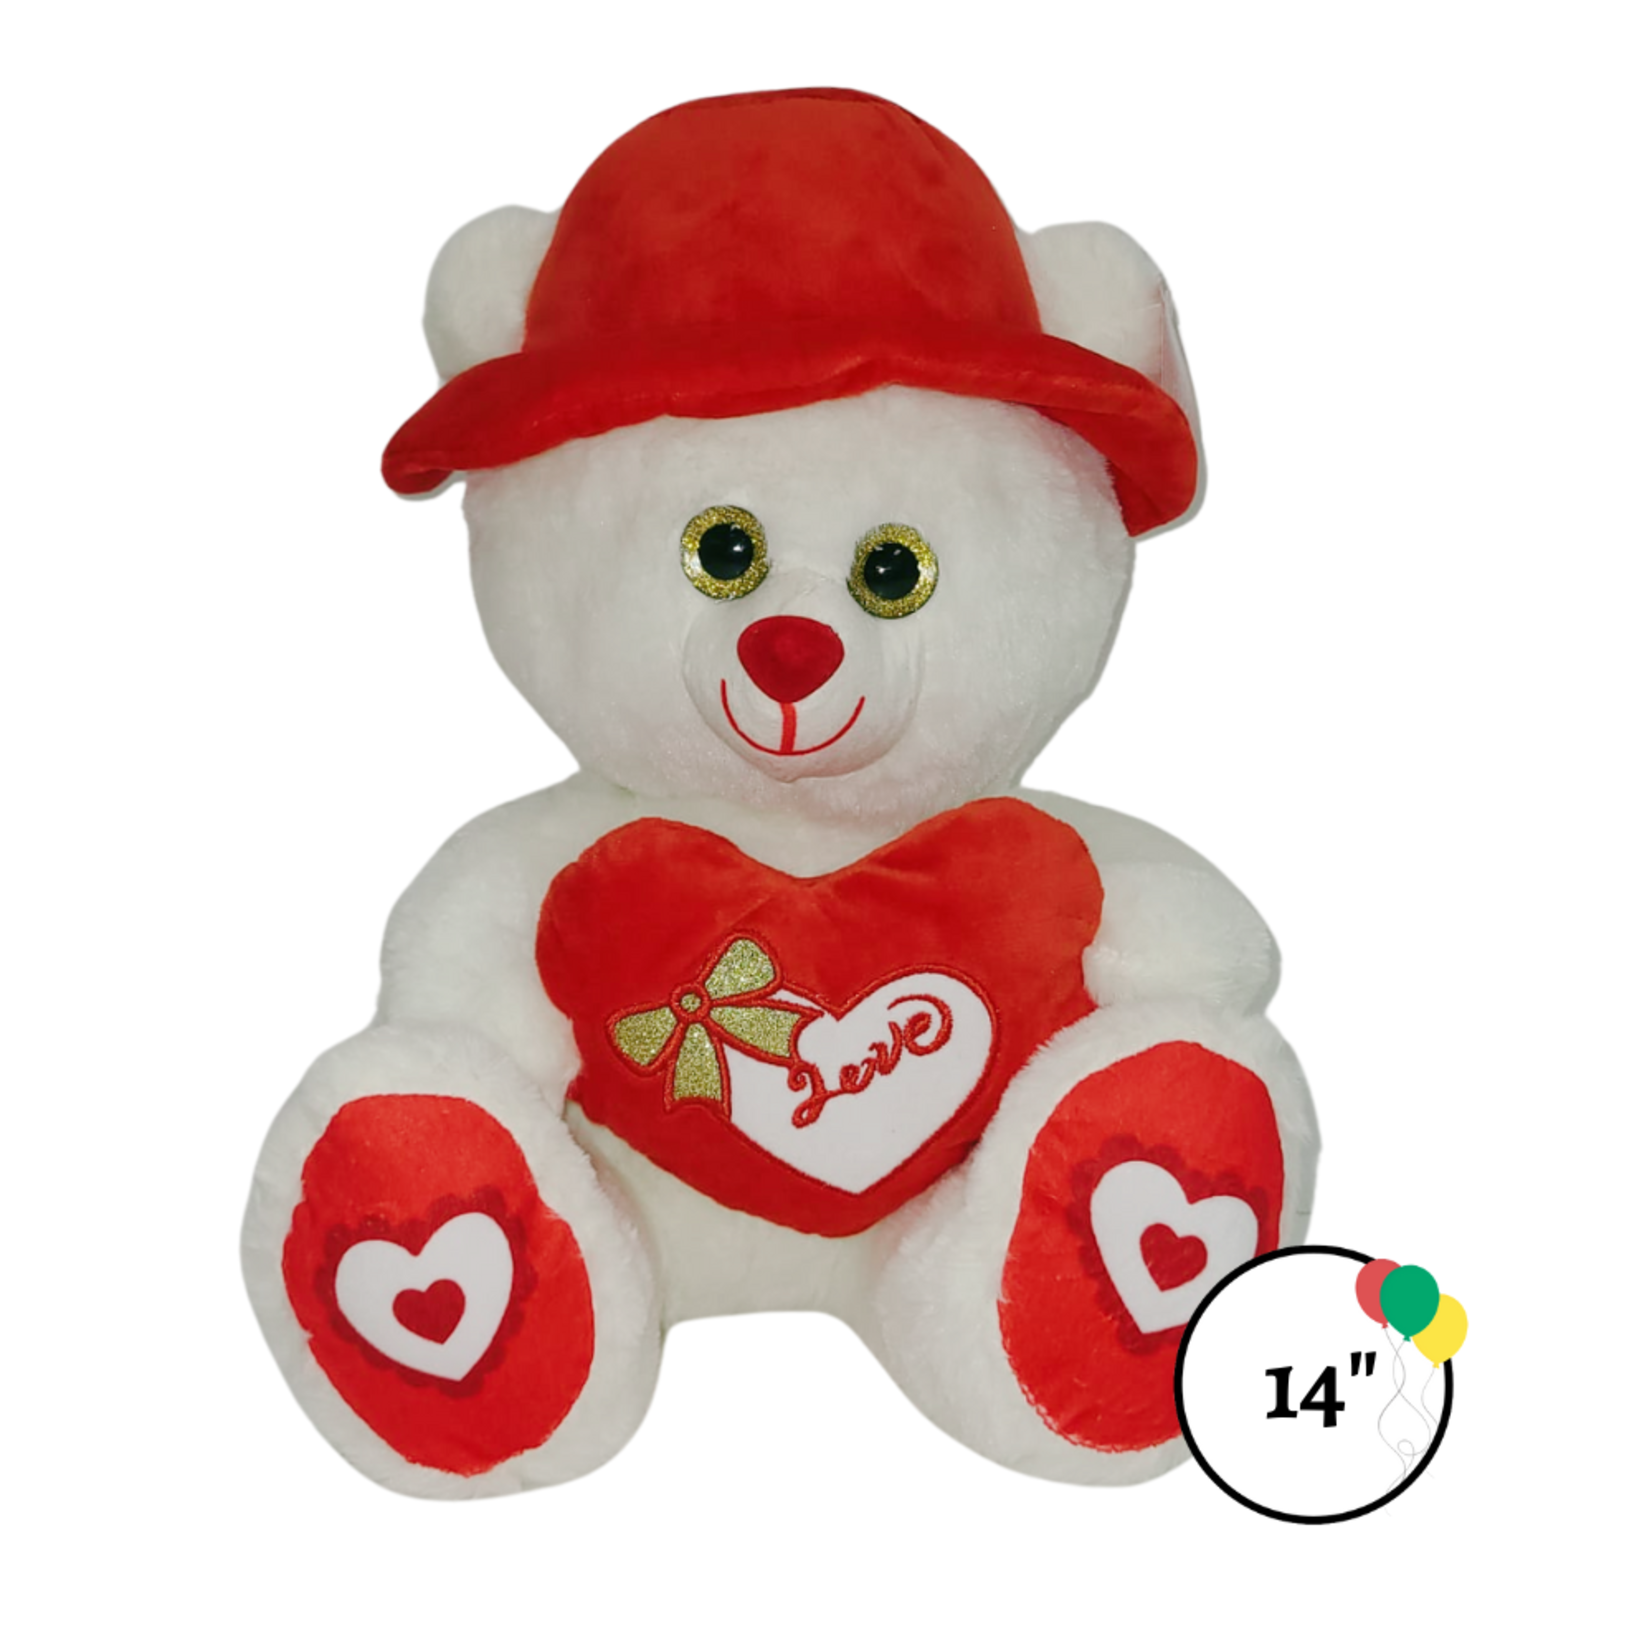 14" Beige Bear w Red Heart and Cap